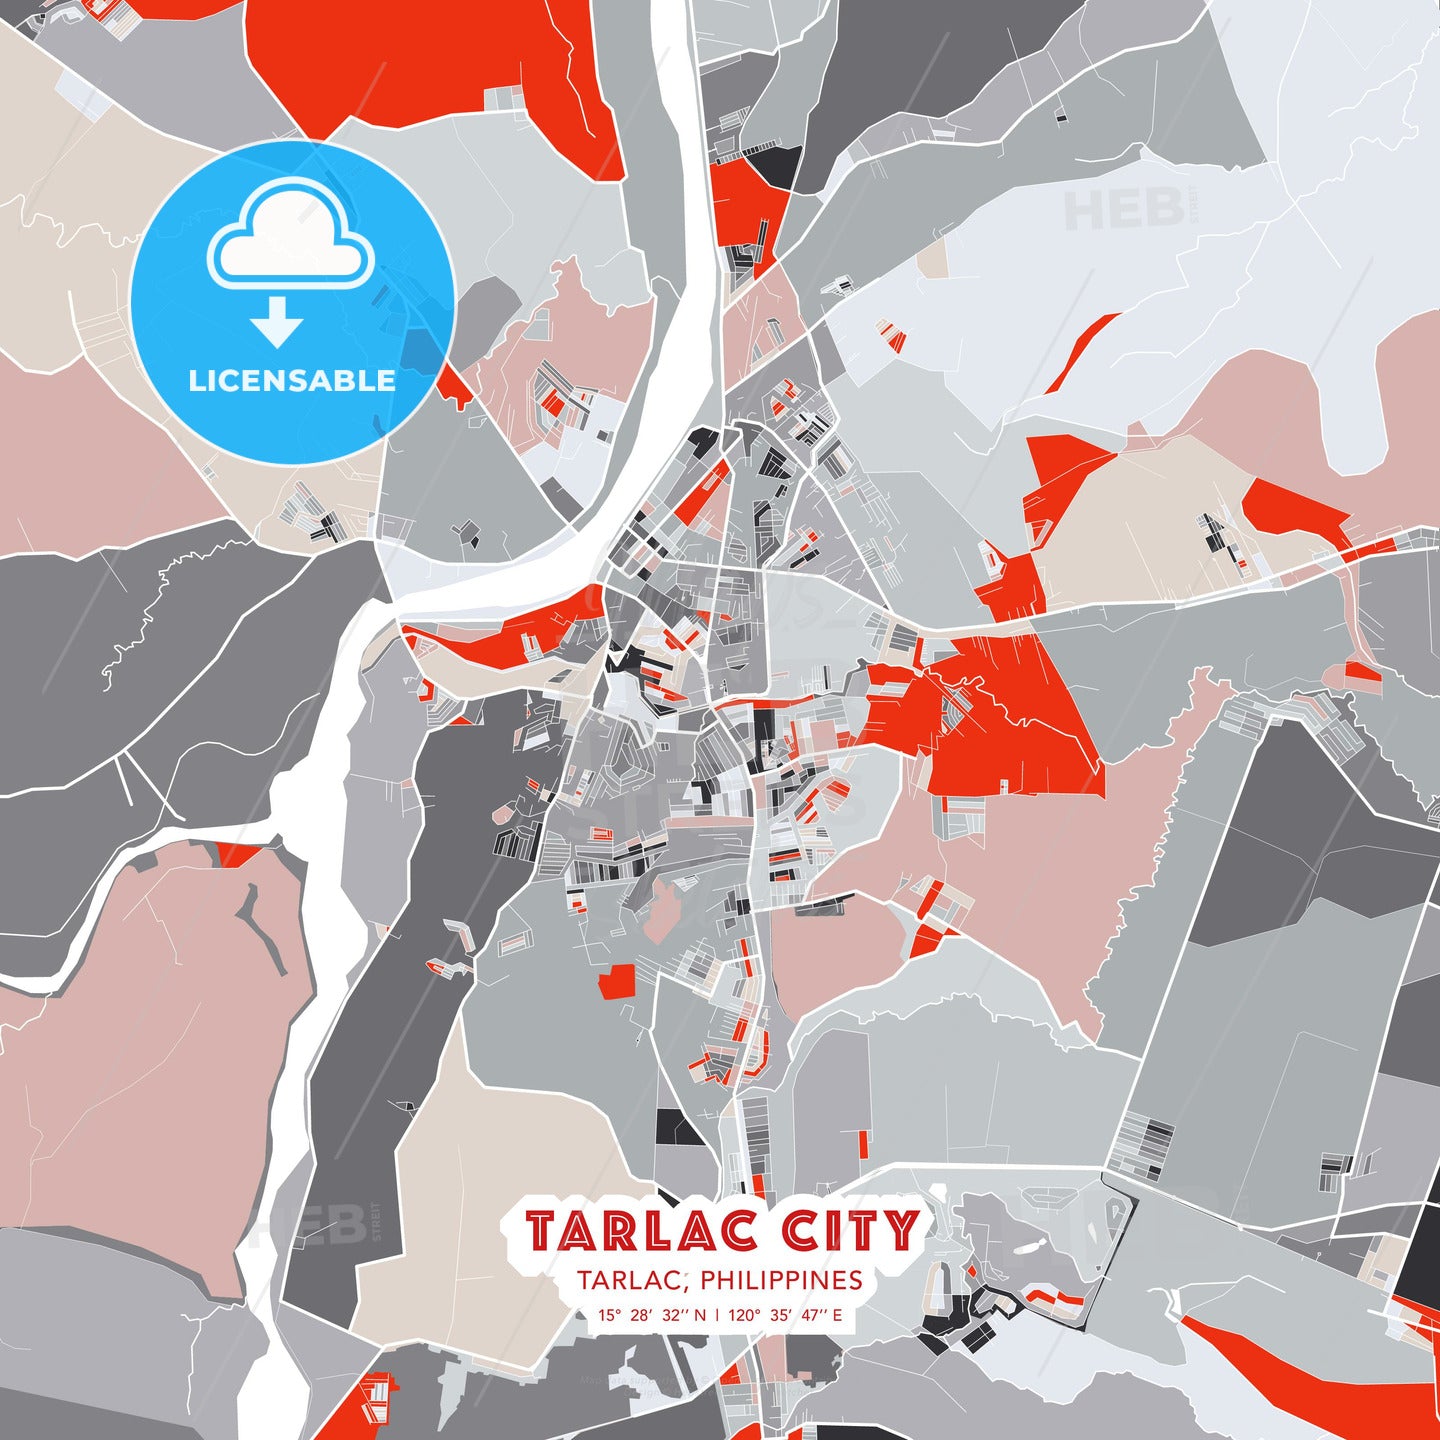 Tarlac City, Tarlac, Philippines, modern map - HEBSTREITS Sketches